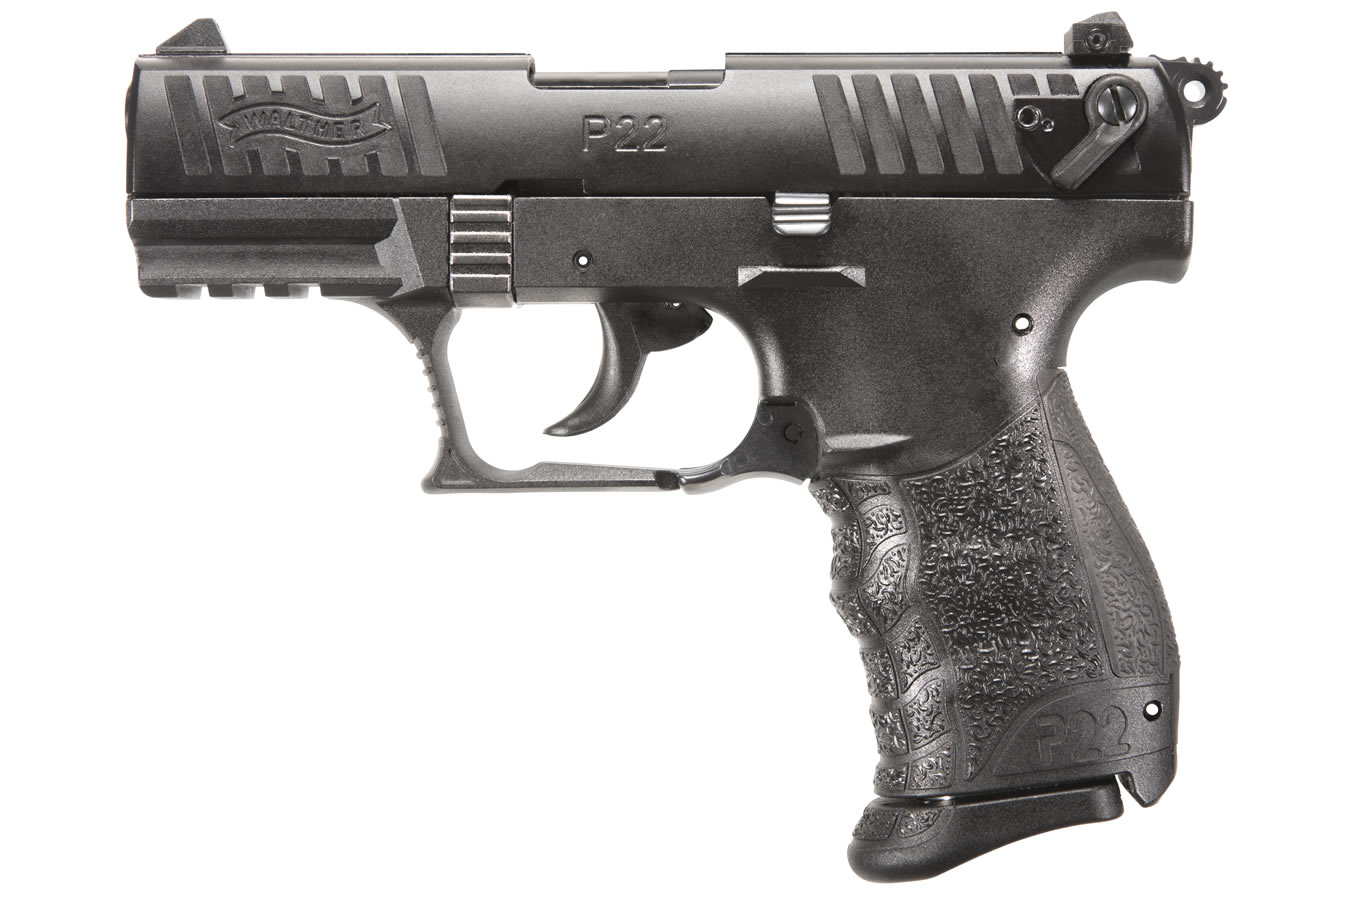 No. 14 Best Selling: WALTHER P22Q SPORT BLACK 22LR